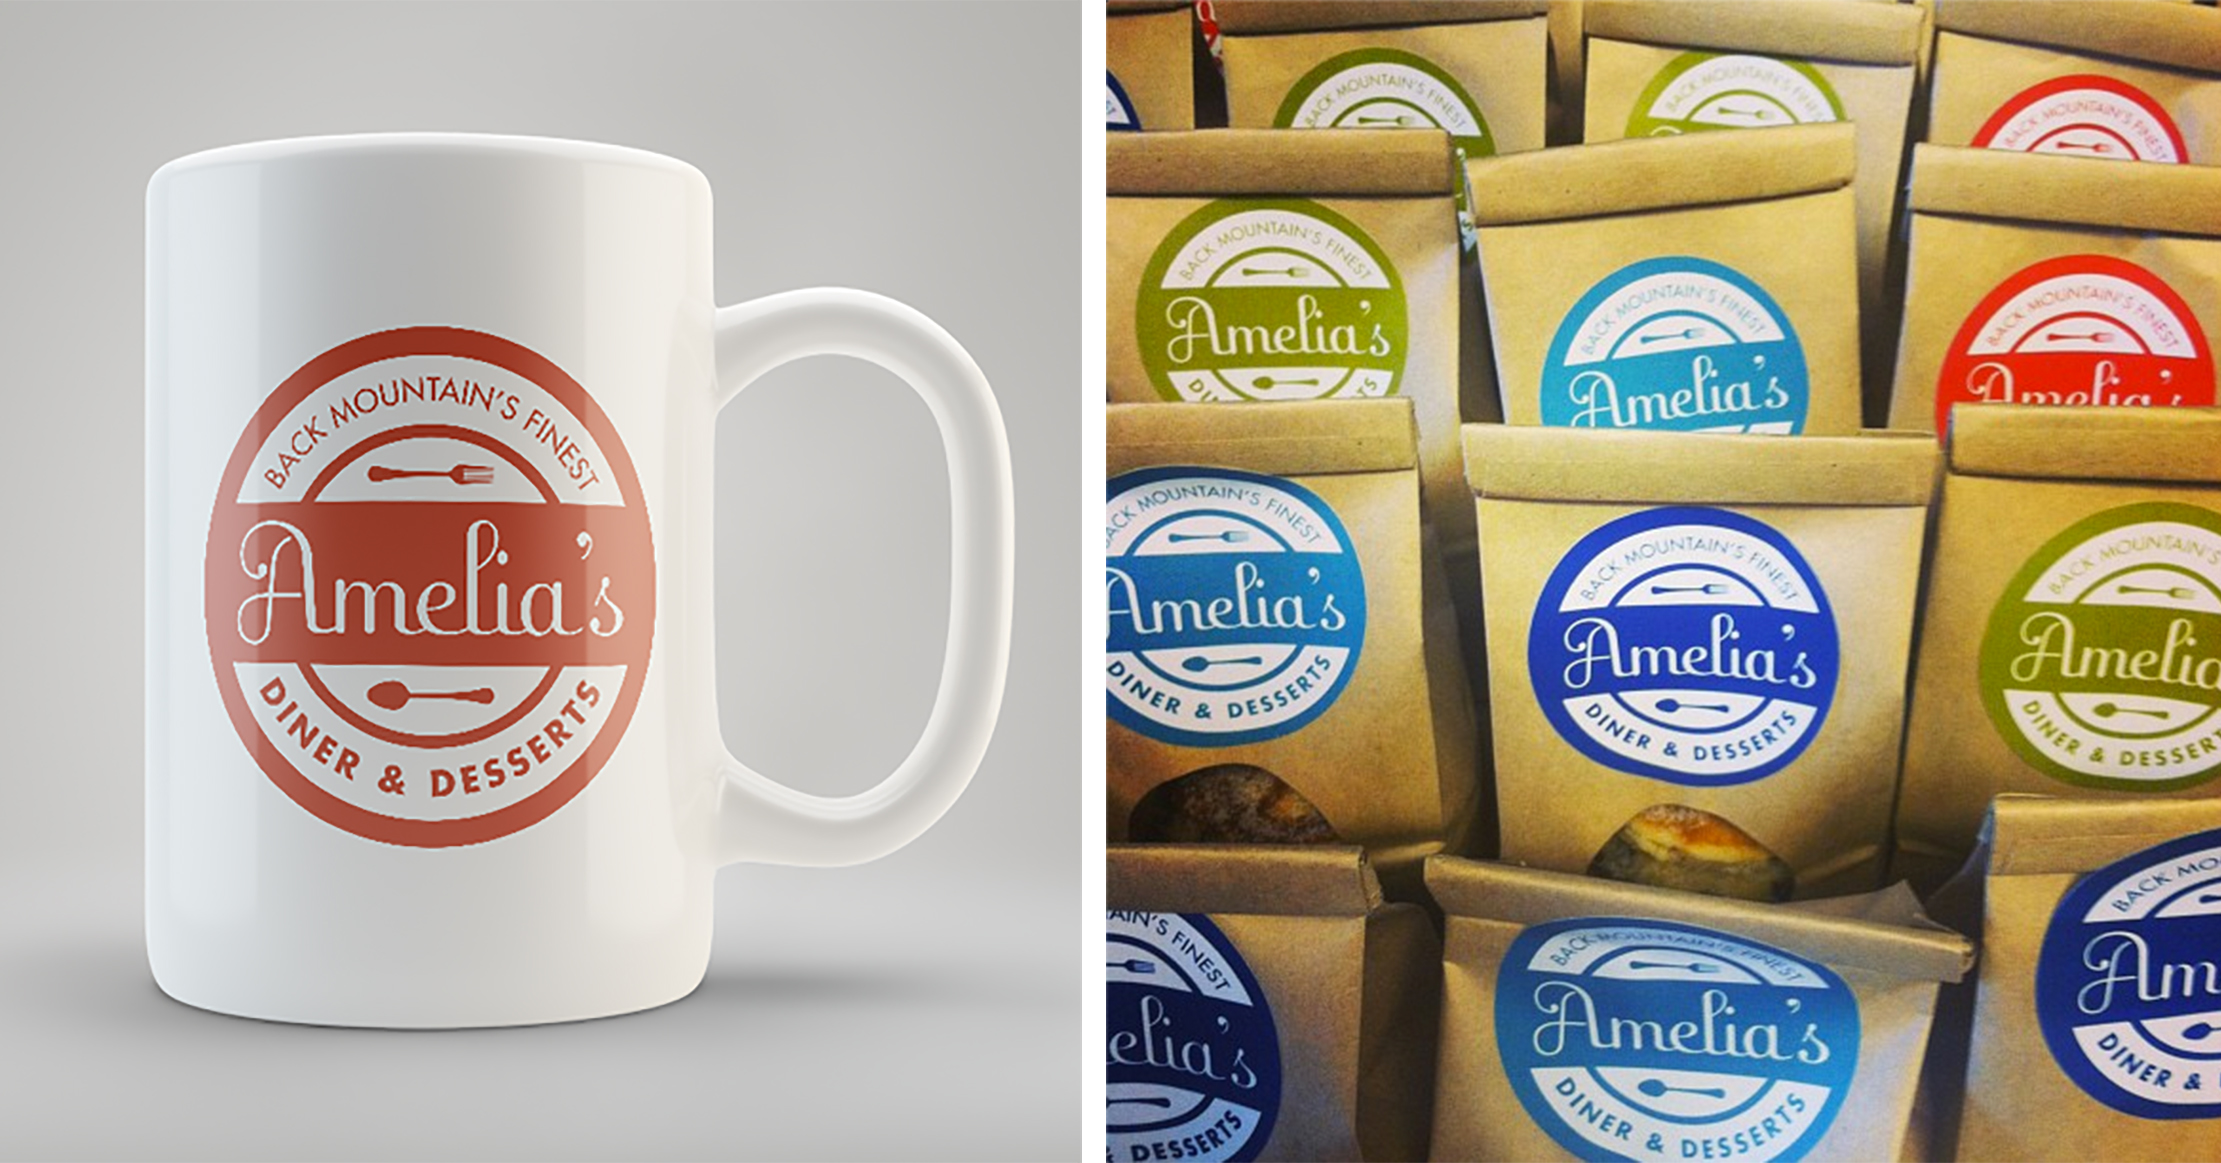 Brand Identity by Just Make Things – Amelia's Diner Mug and Bags